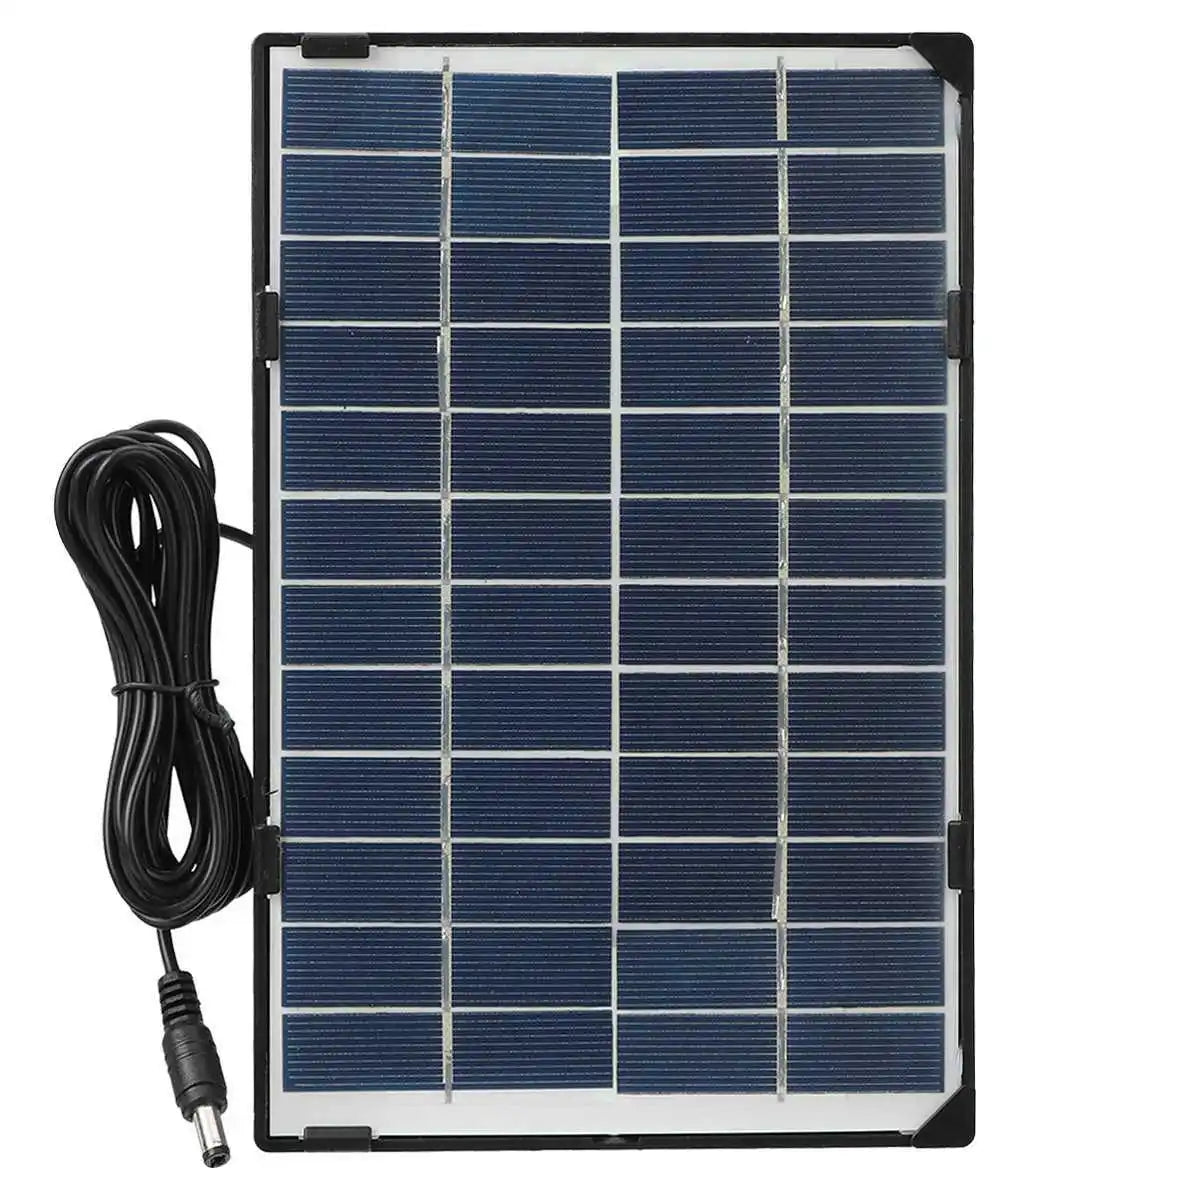 30W Portable Solar Panel, Note: A 1-2cm tolerance applies, as this product uses manual measurement.